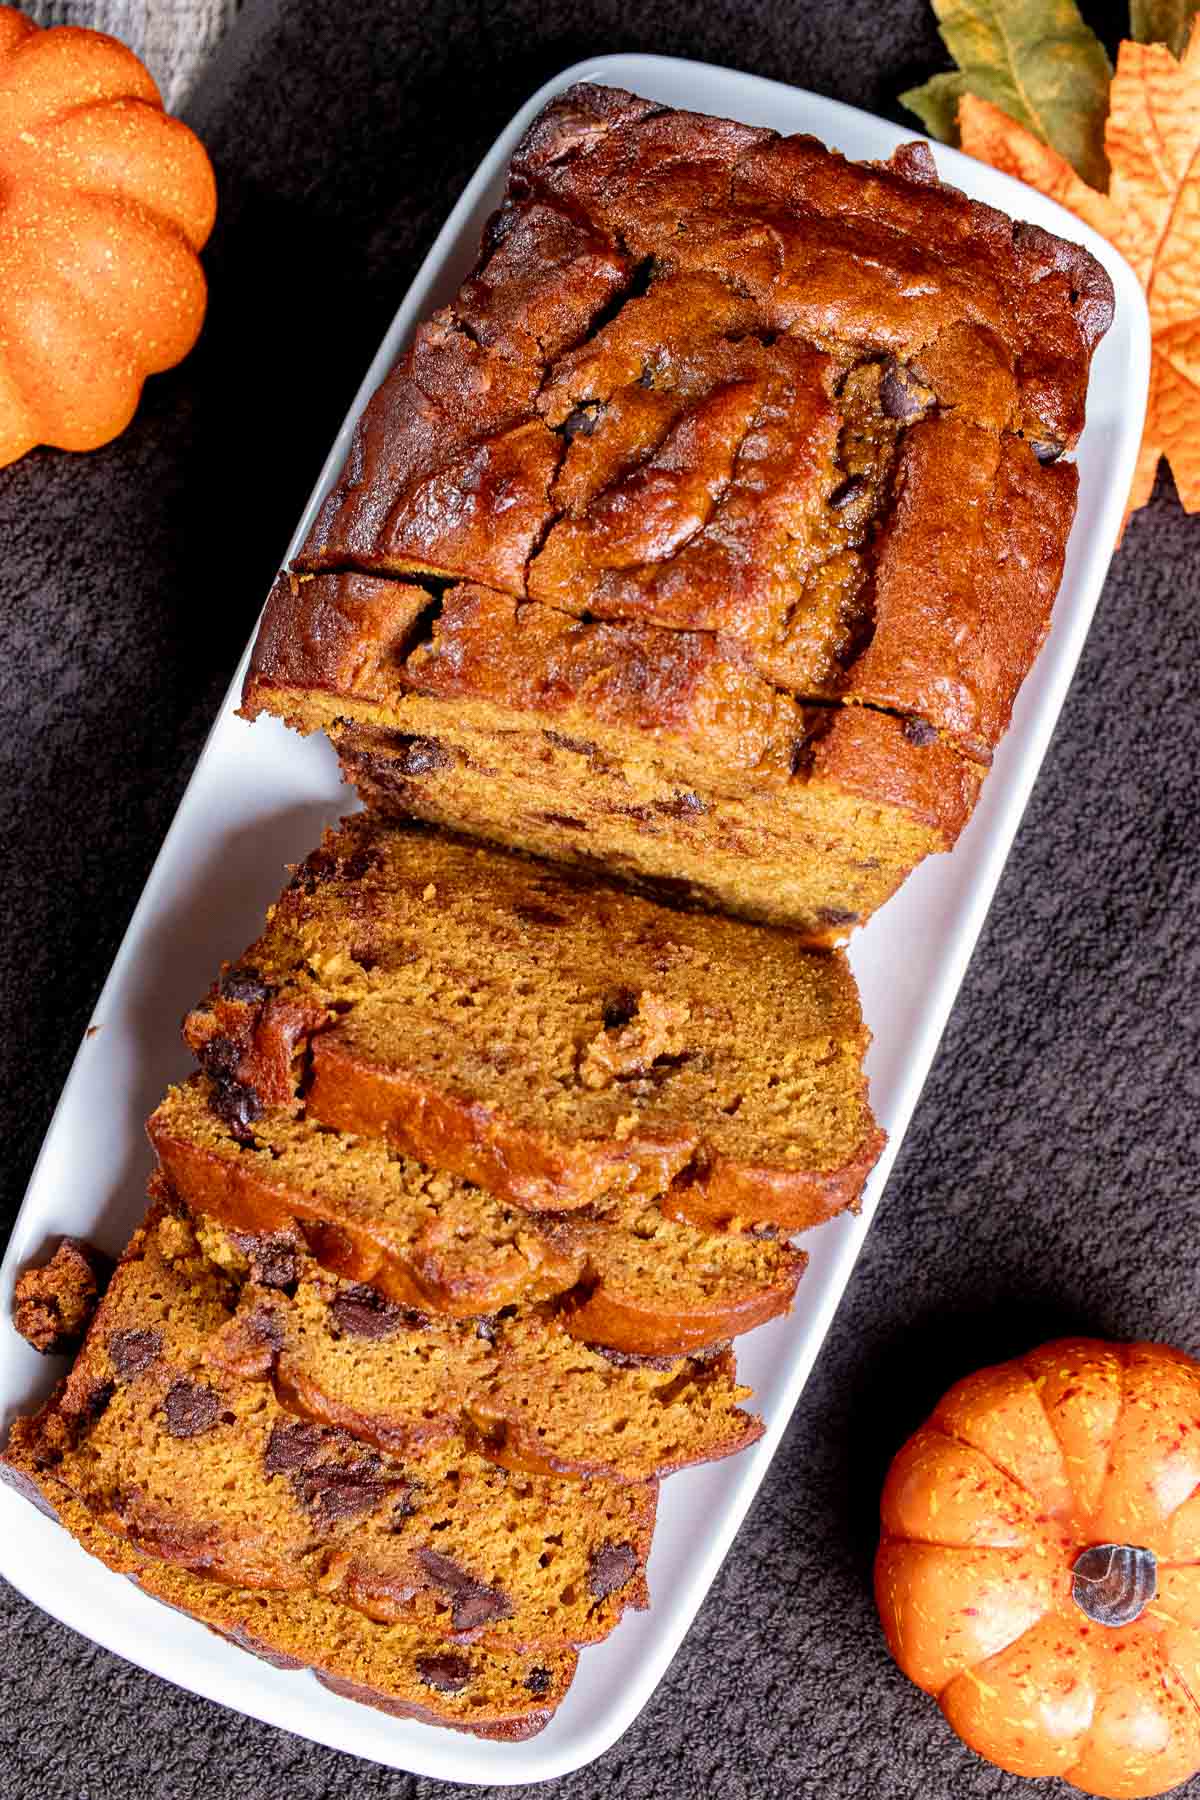 Overhead view of pumpkin chocolate chip bread partially sliced on a white rectangular plate.